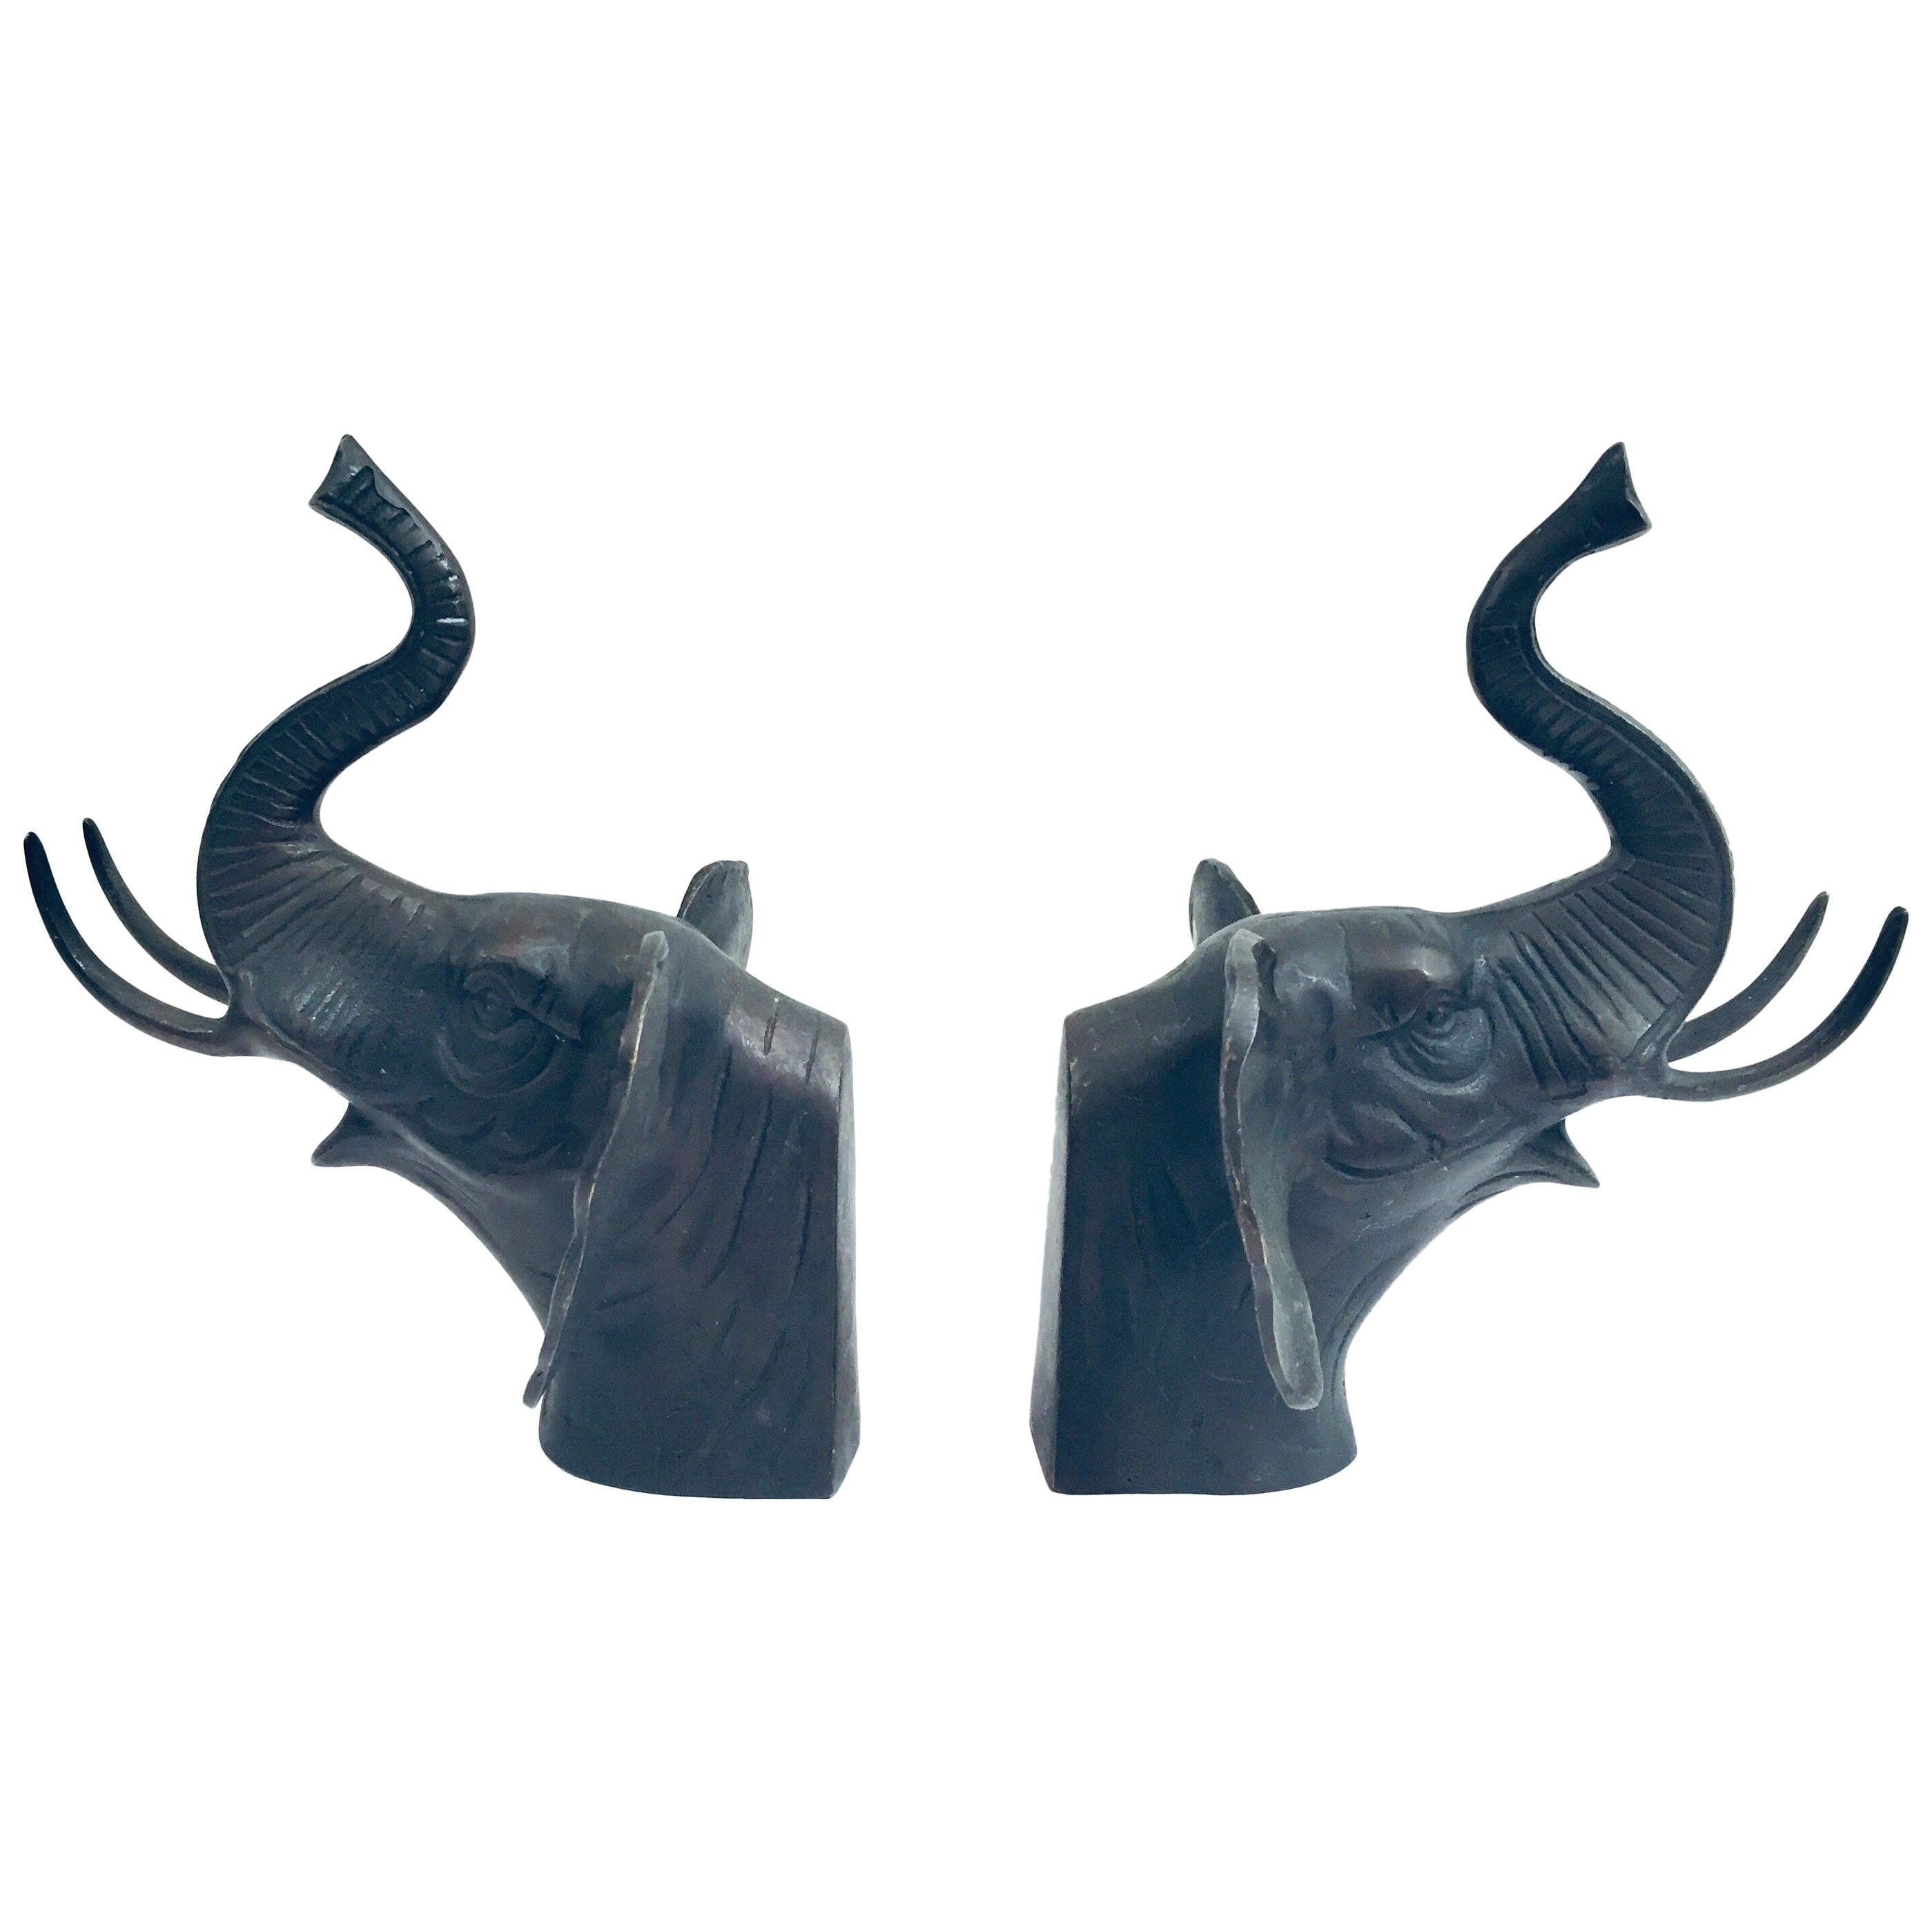 Pair of Cast Iron Elephant Heads Bookends